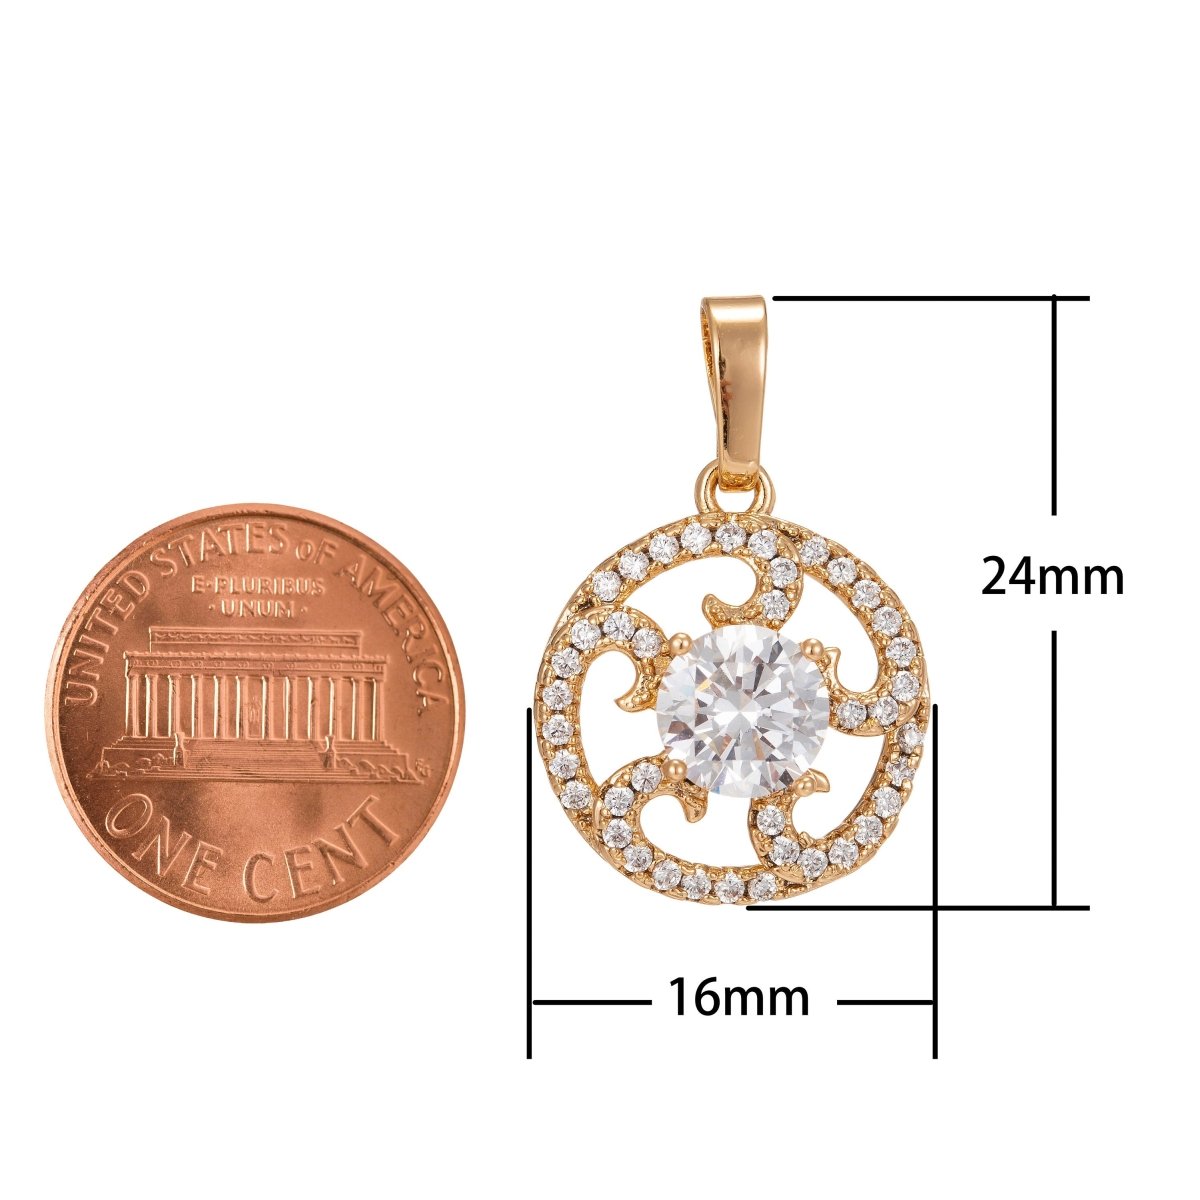 Dainty Micro Pave Gold Filled Sun Burst Charm 24x16mm, Cubic Zirconia PENDANT Charm For Necklace Making, Jewelry Component Supply I-243 - DLUXCA